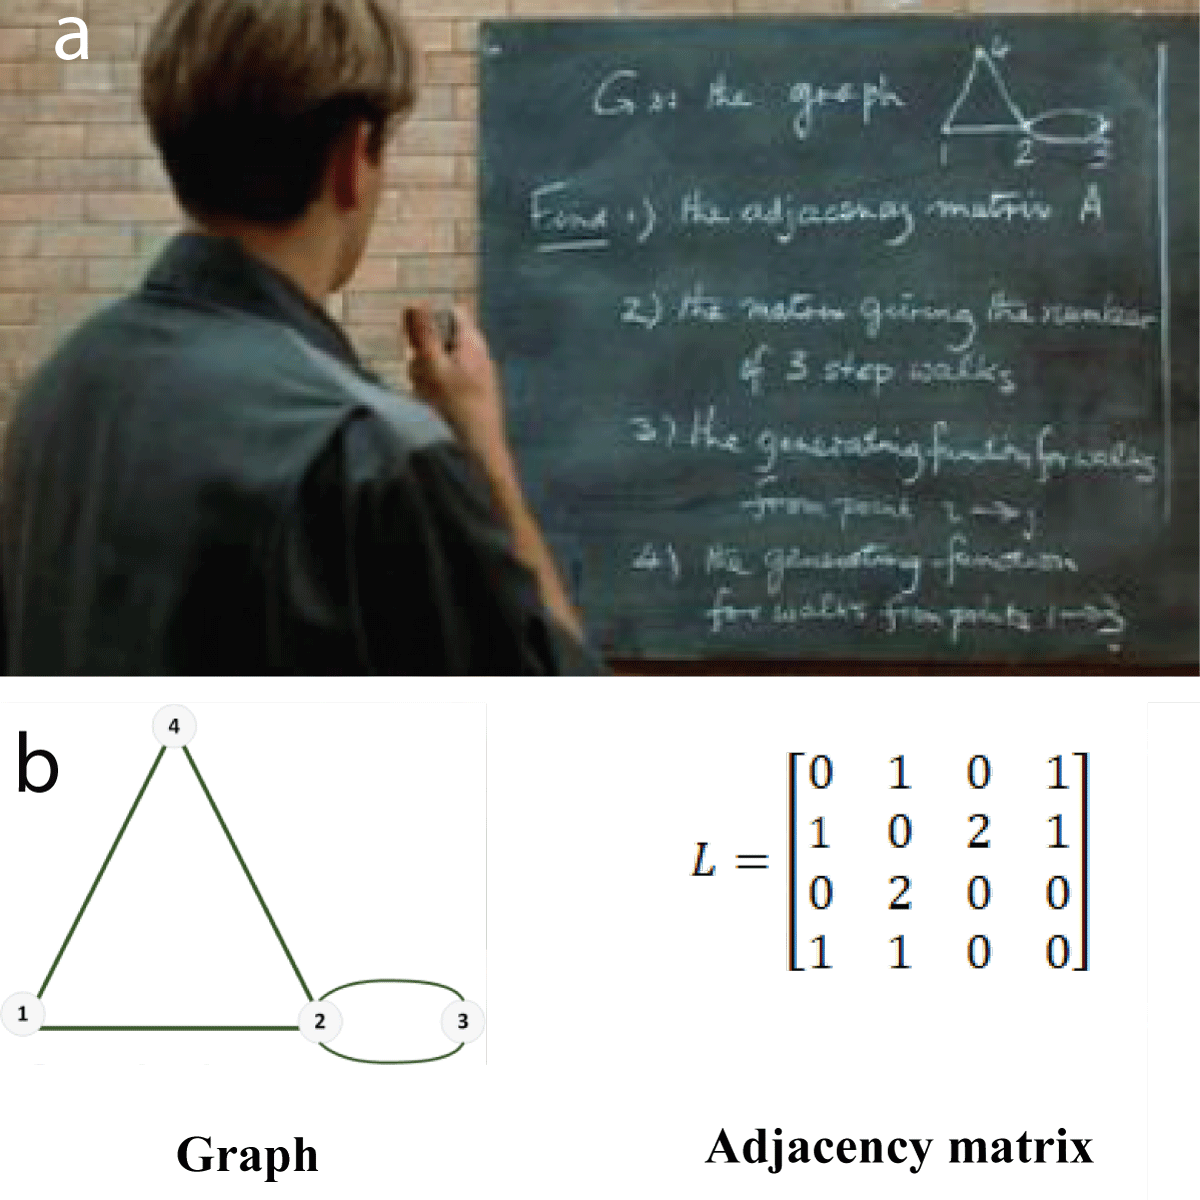 a) Scene with mathematical problems on a blackboard from the movie. Good Will Hunting [20] and b) The solution to question 1